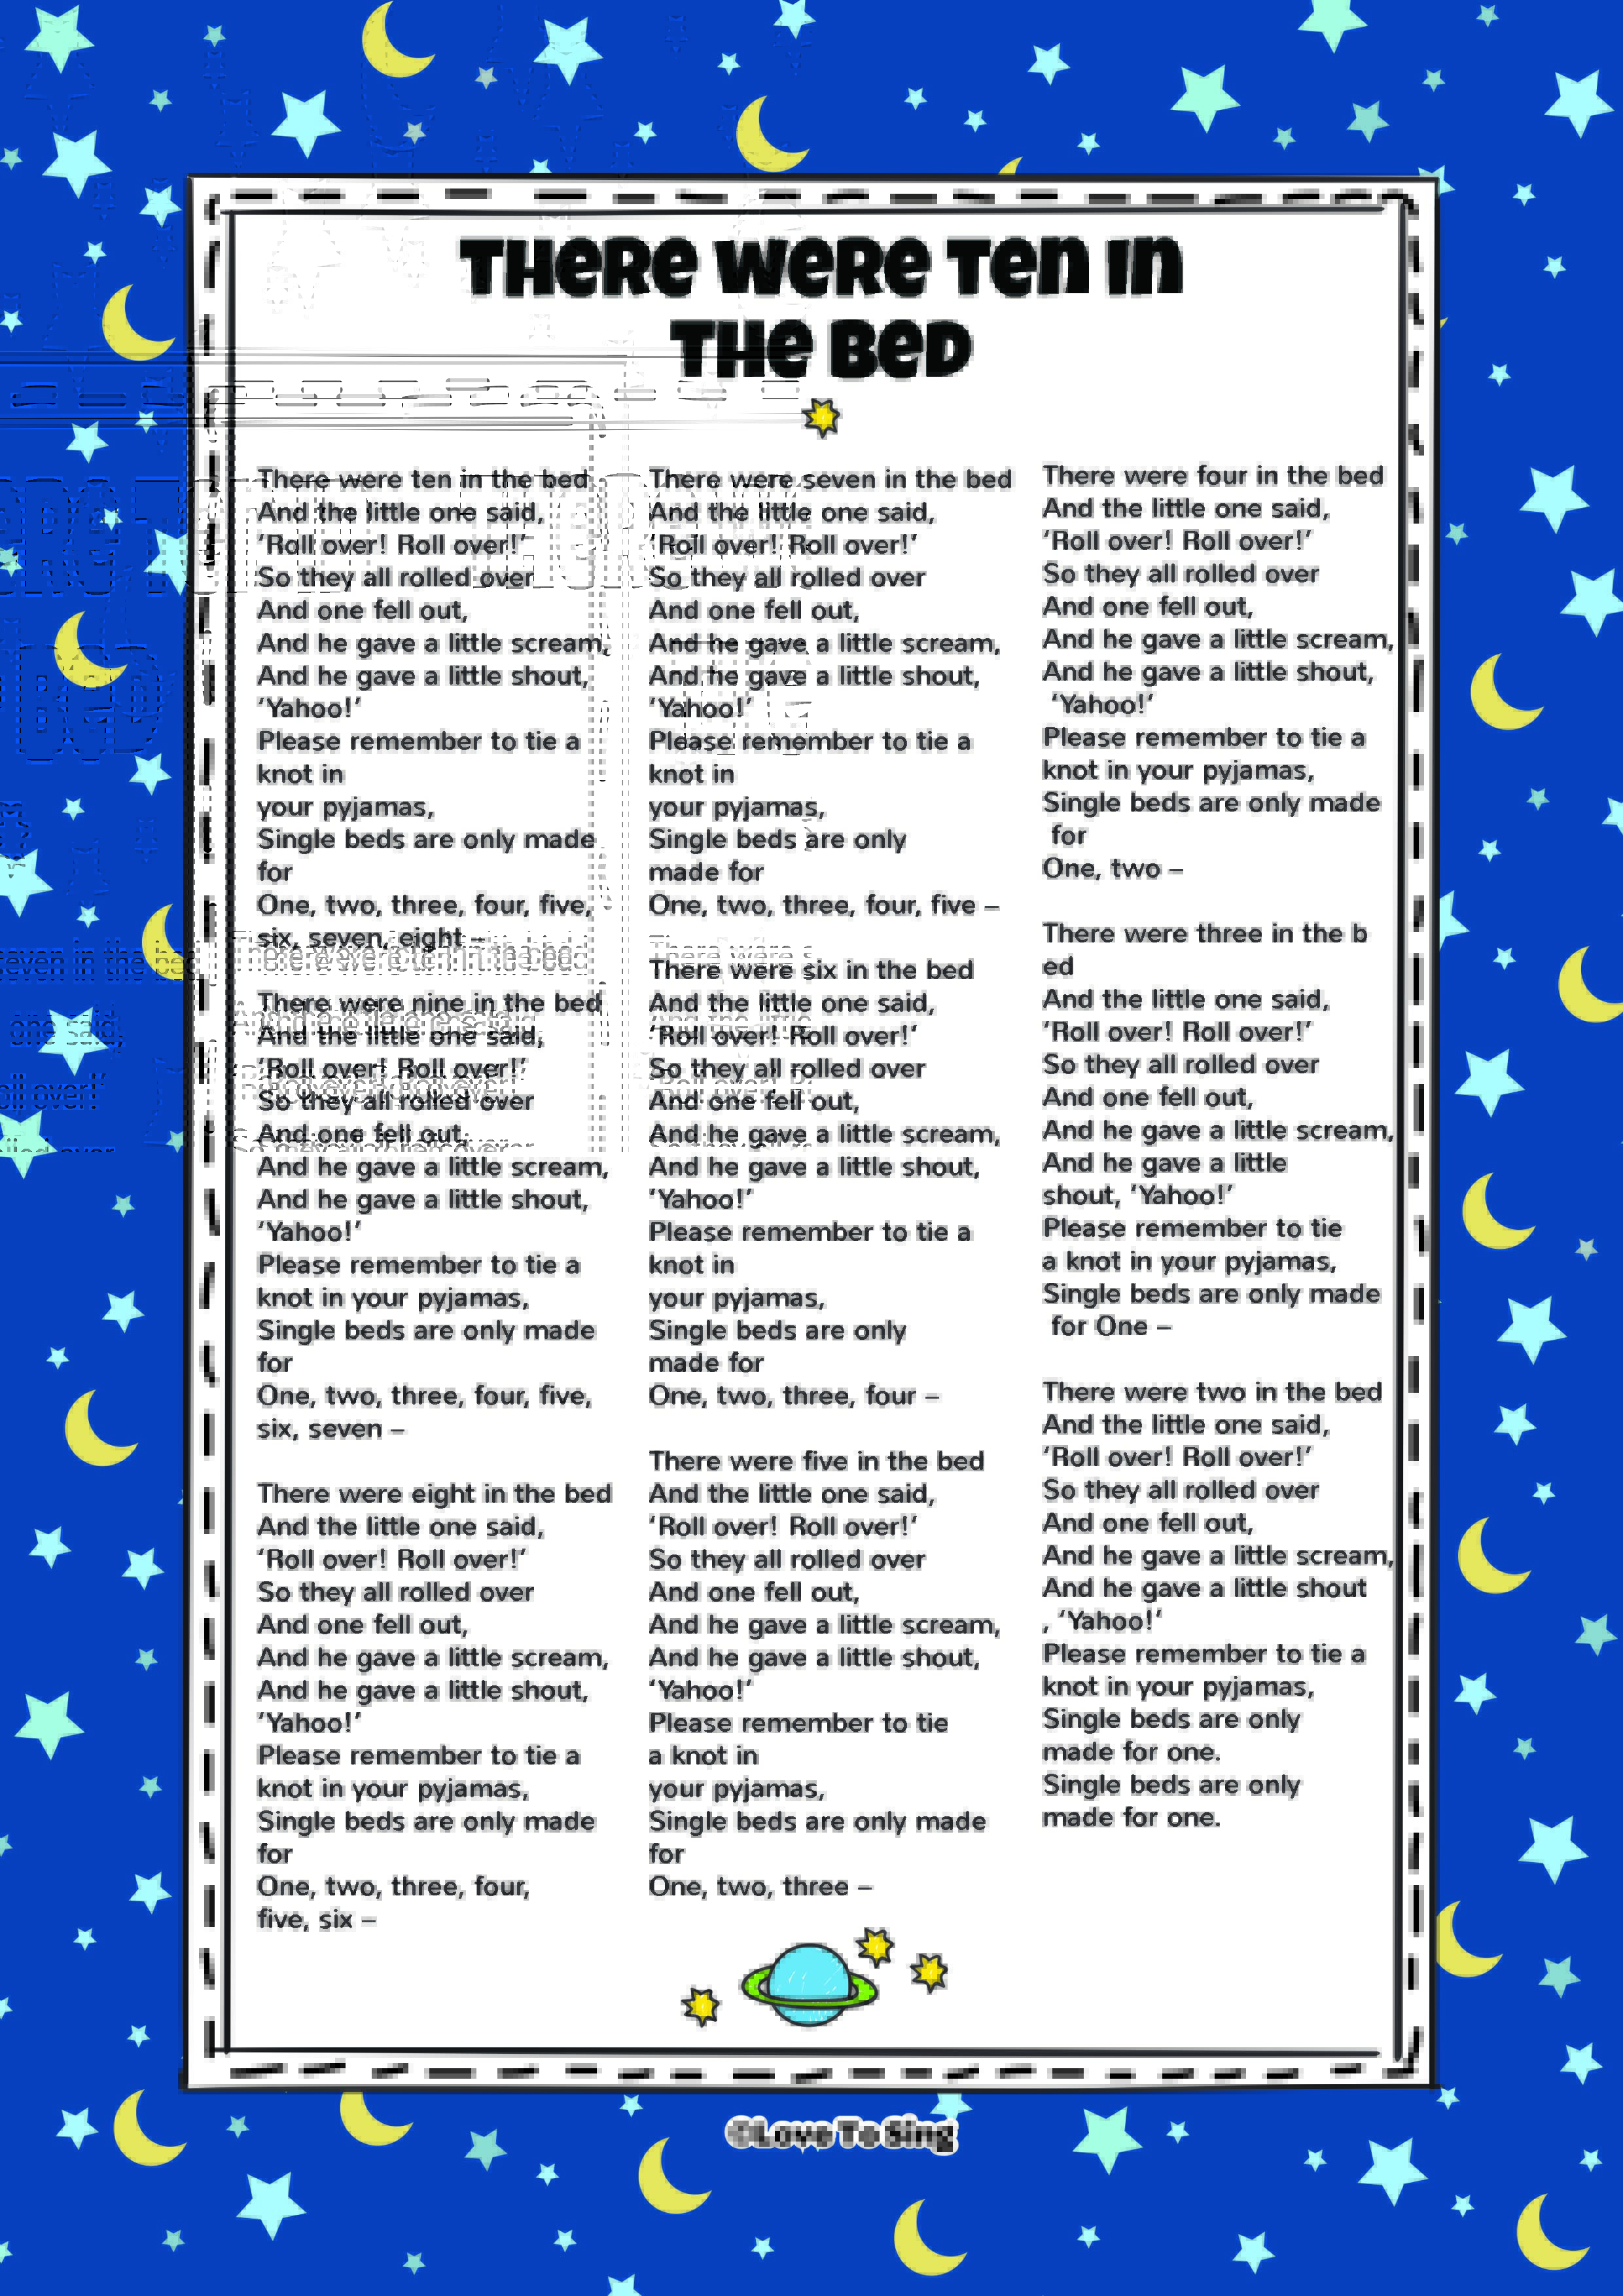 There Were Ten In The Bed Kids Video Song with FREE Lyrics & Activities!